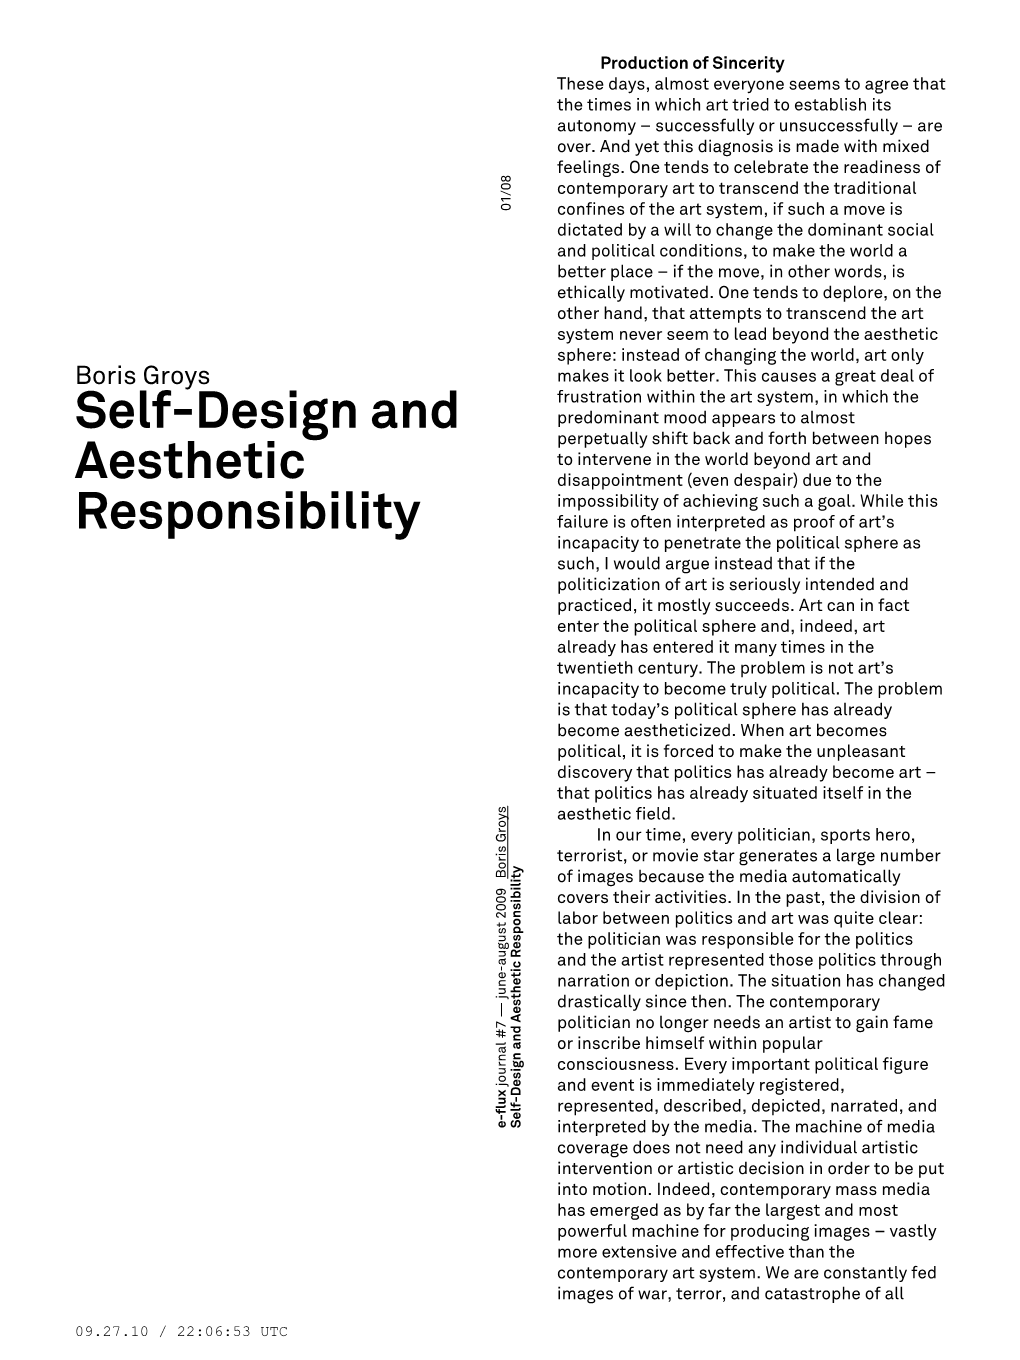 Self-Design and Aesthetic Responsibility